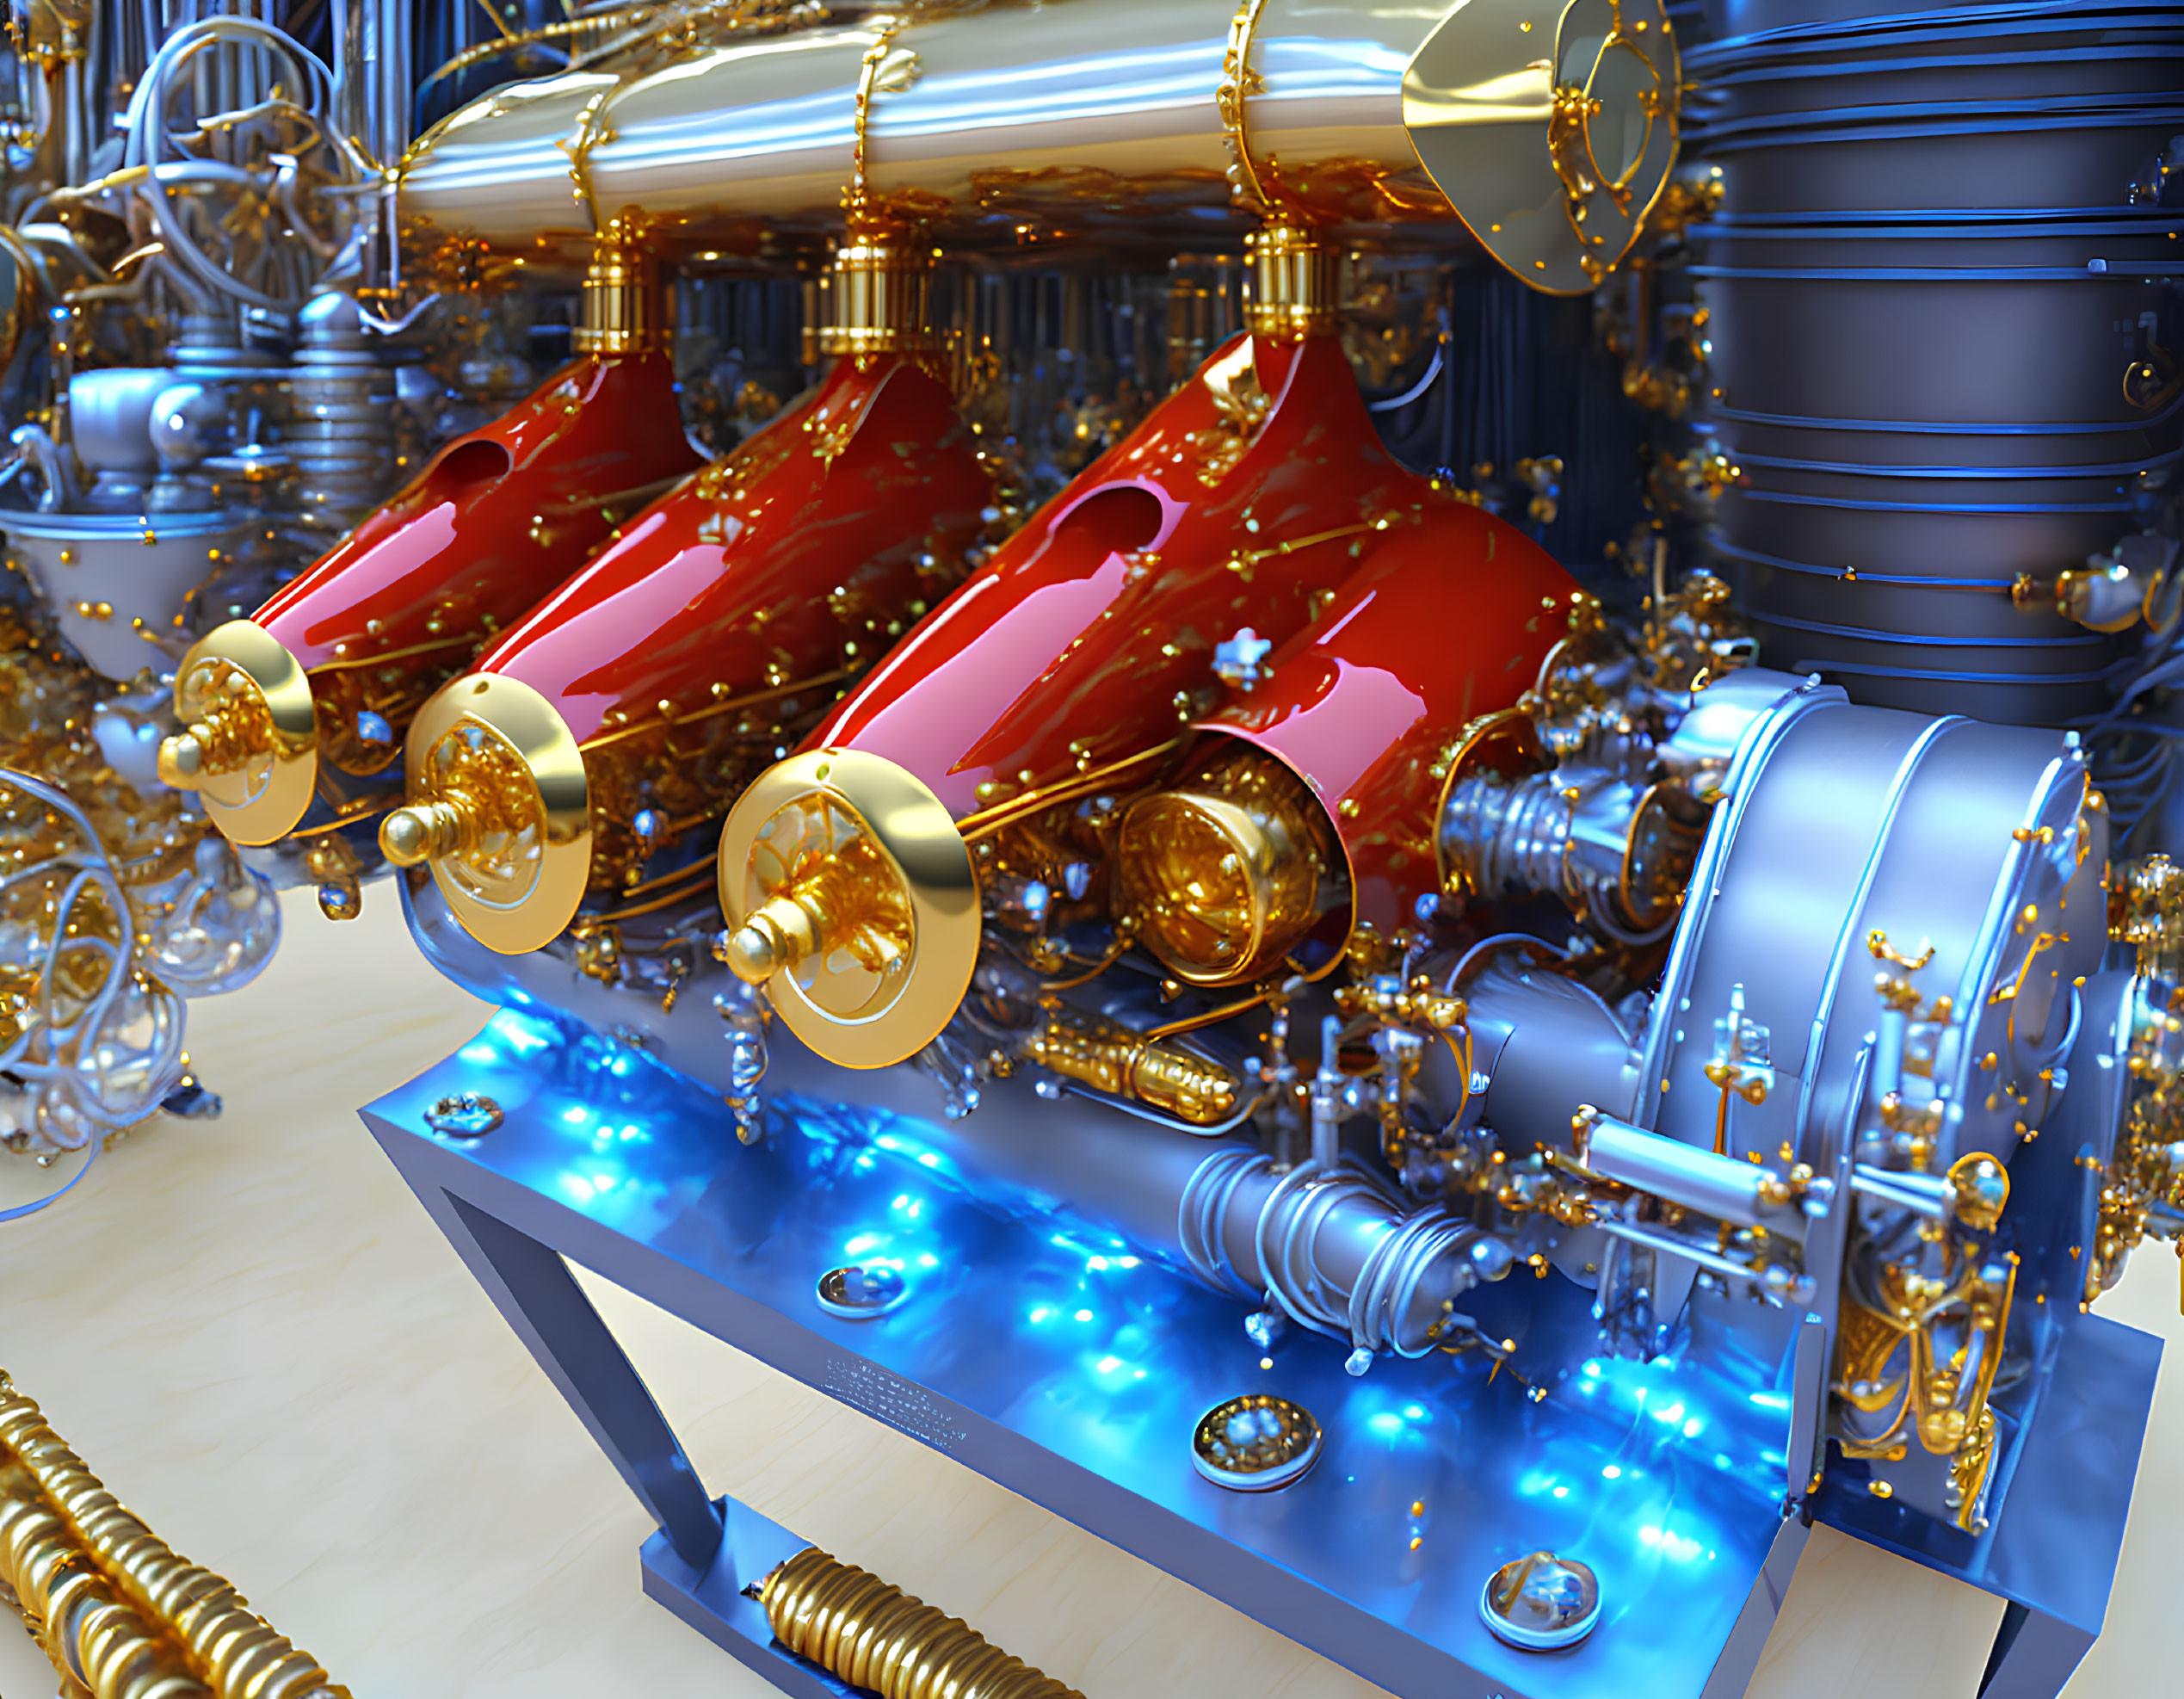 Futuristic 3D rendering of gold and red engine with blue lights